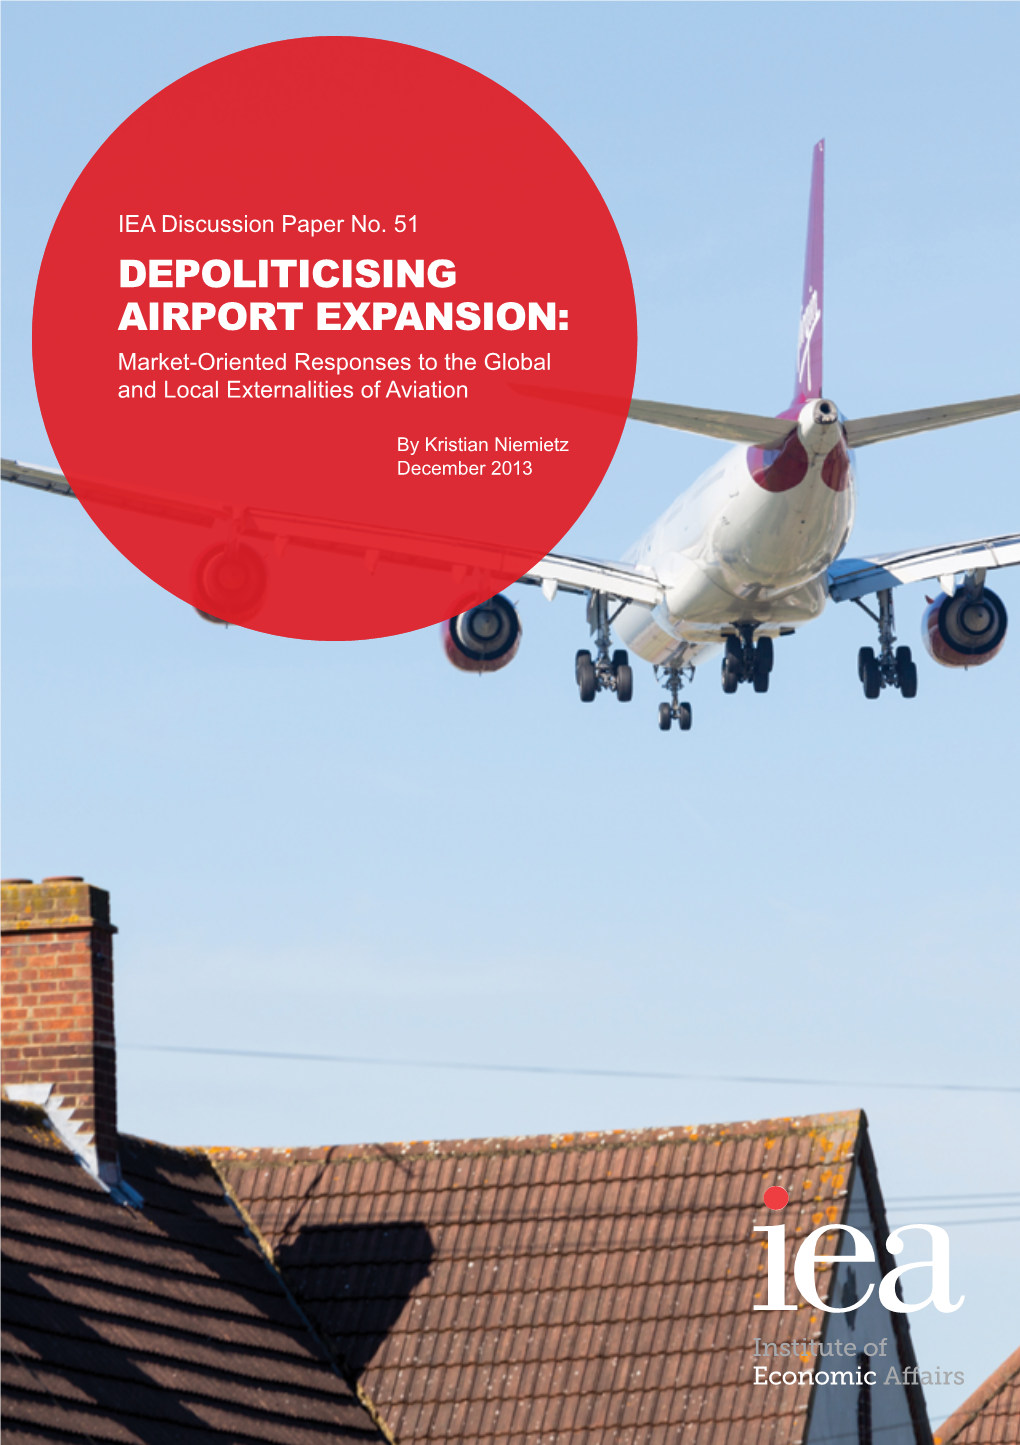 Depoliticising Airport Expansion: Market-Oriented Responses to the Global and Local Externalities of Aviation